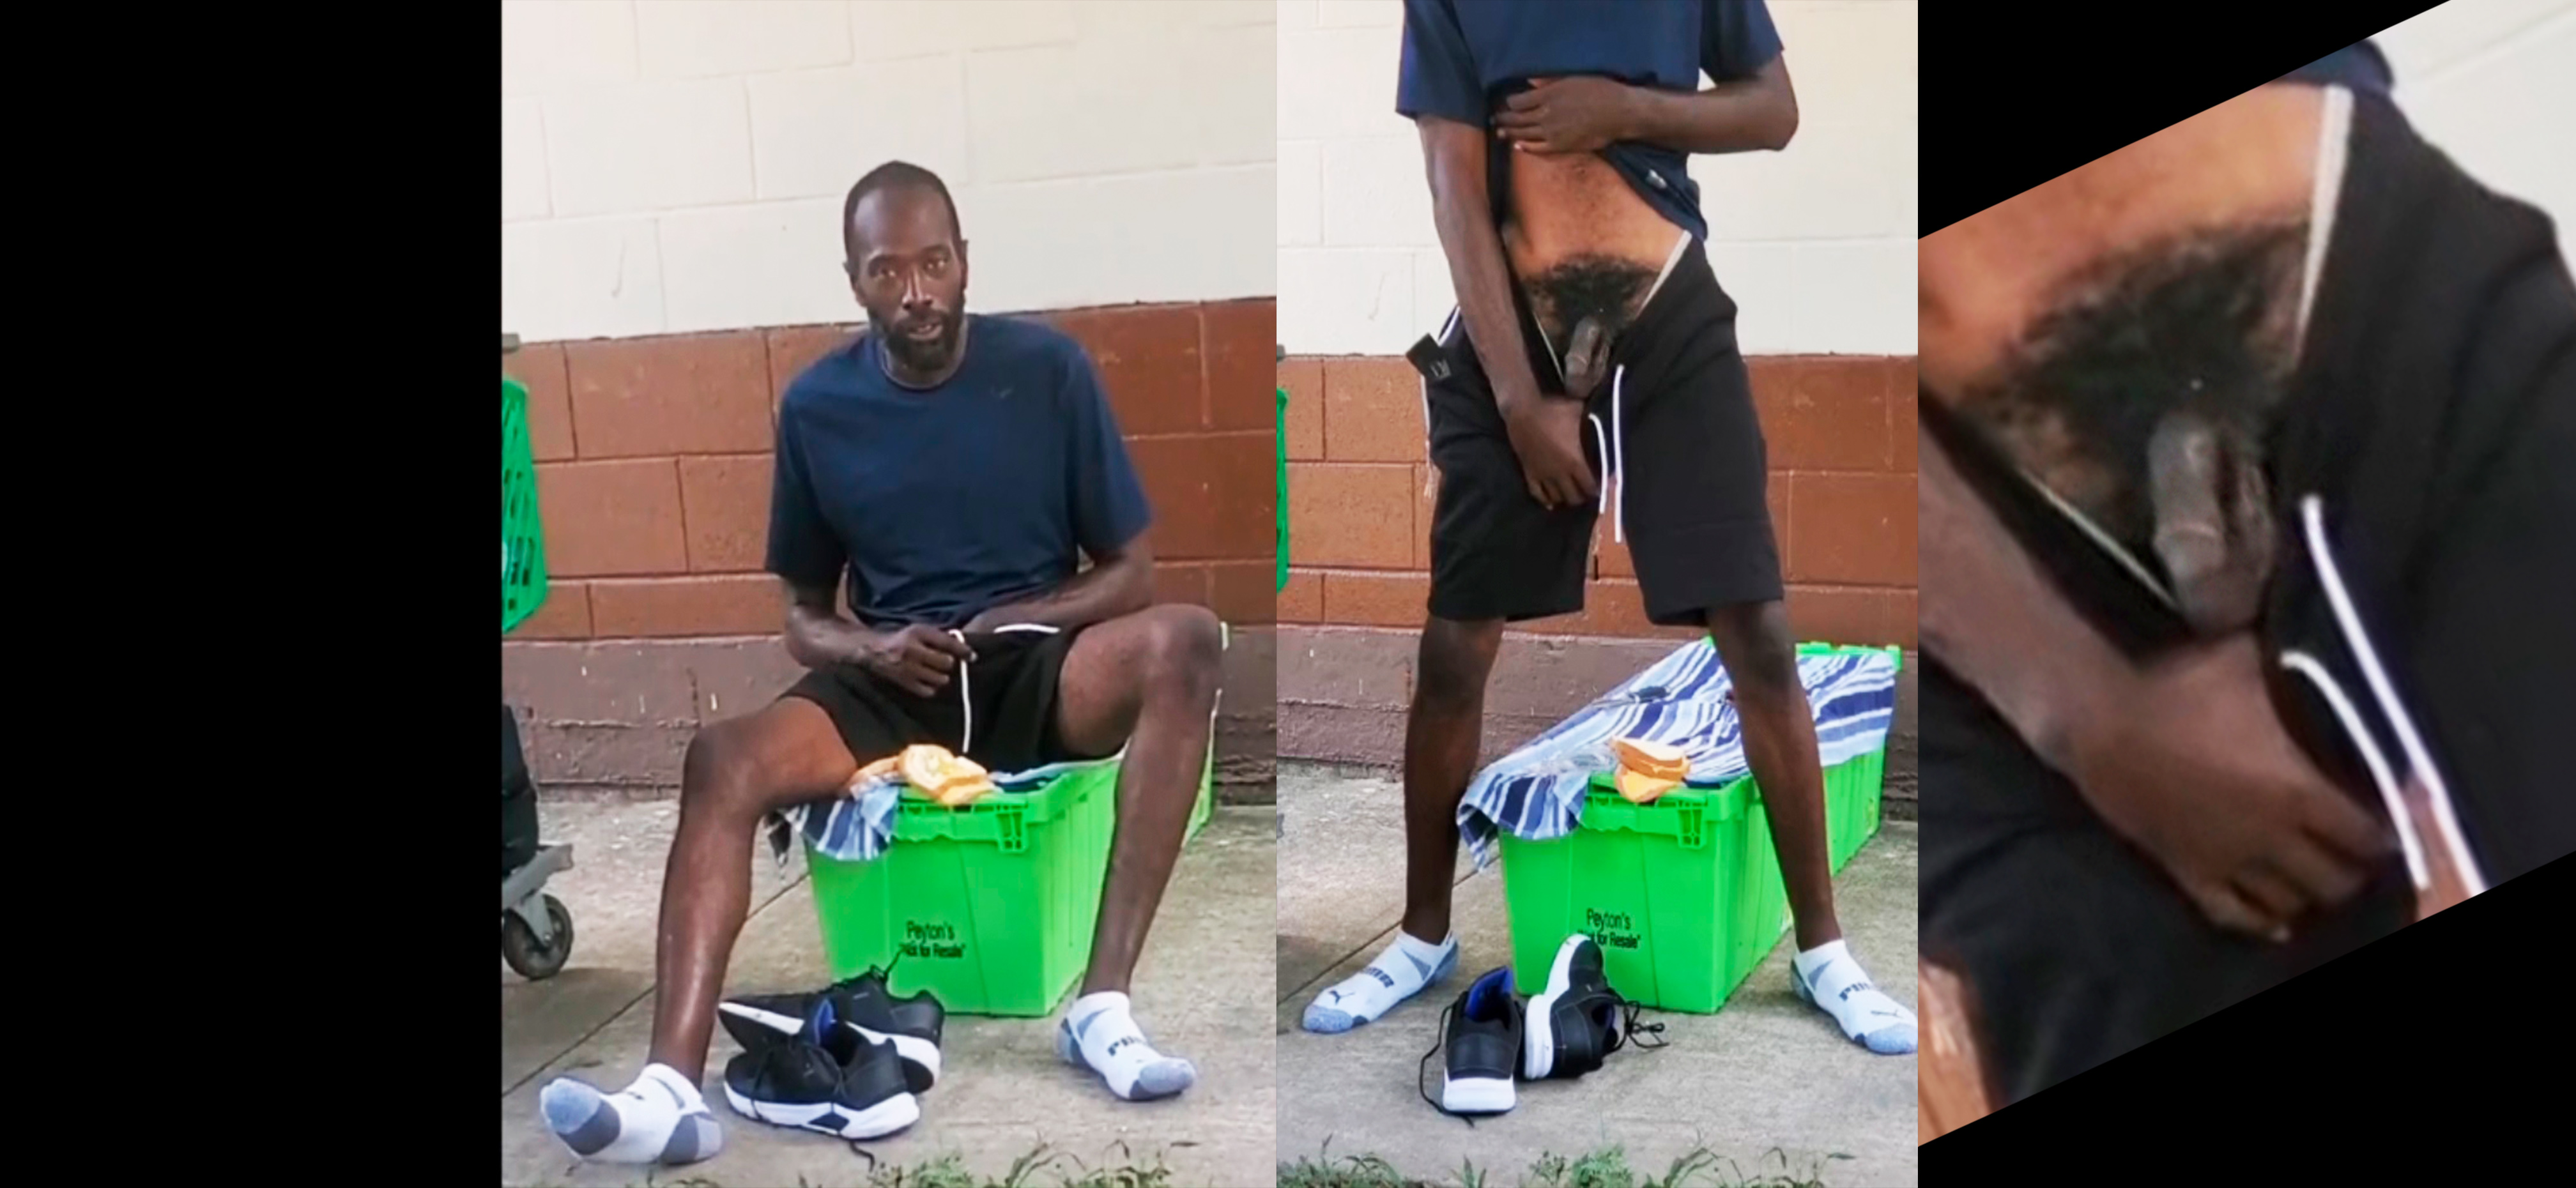 skinny black homeless shows how good he is